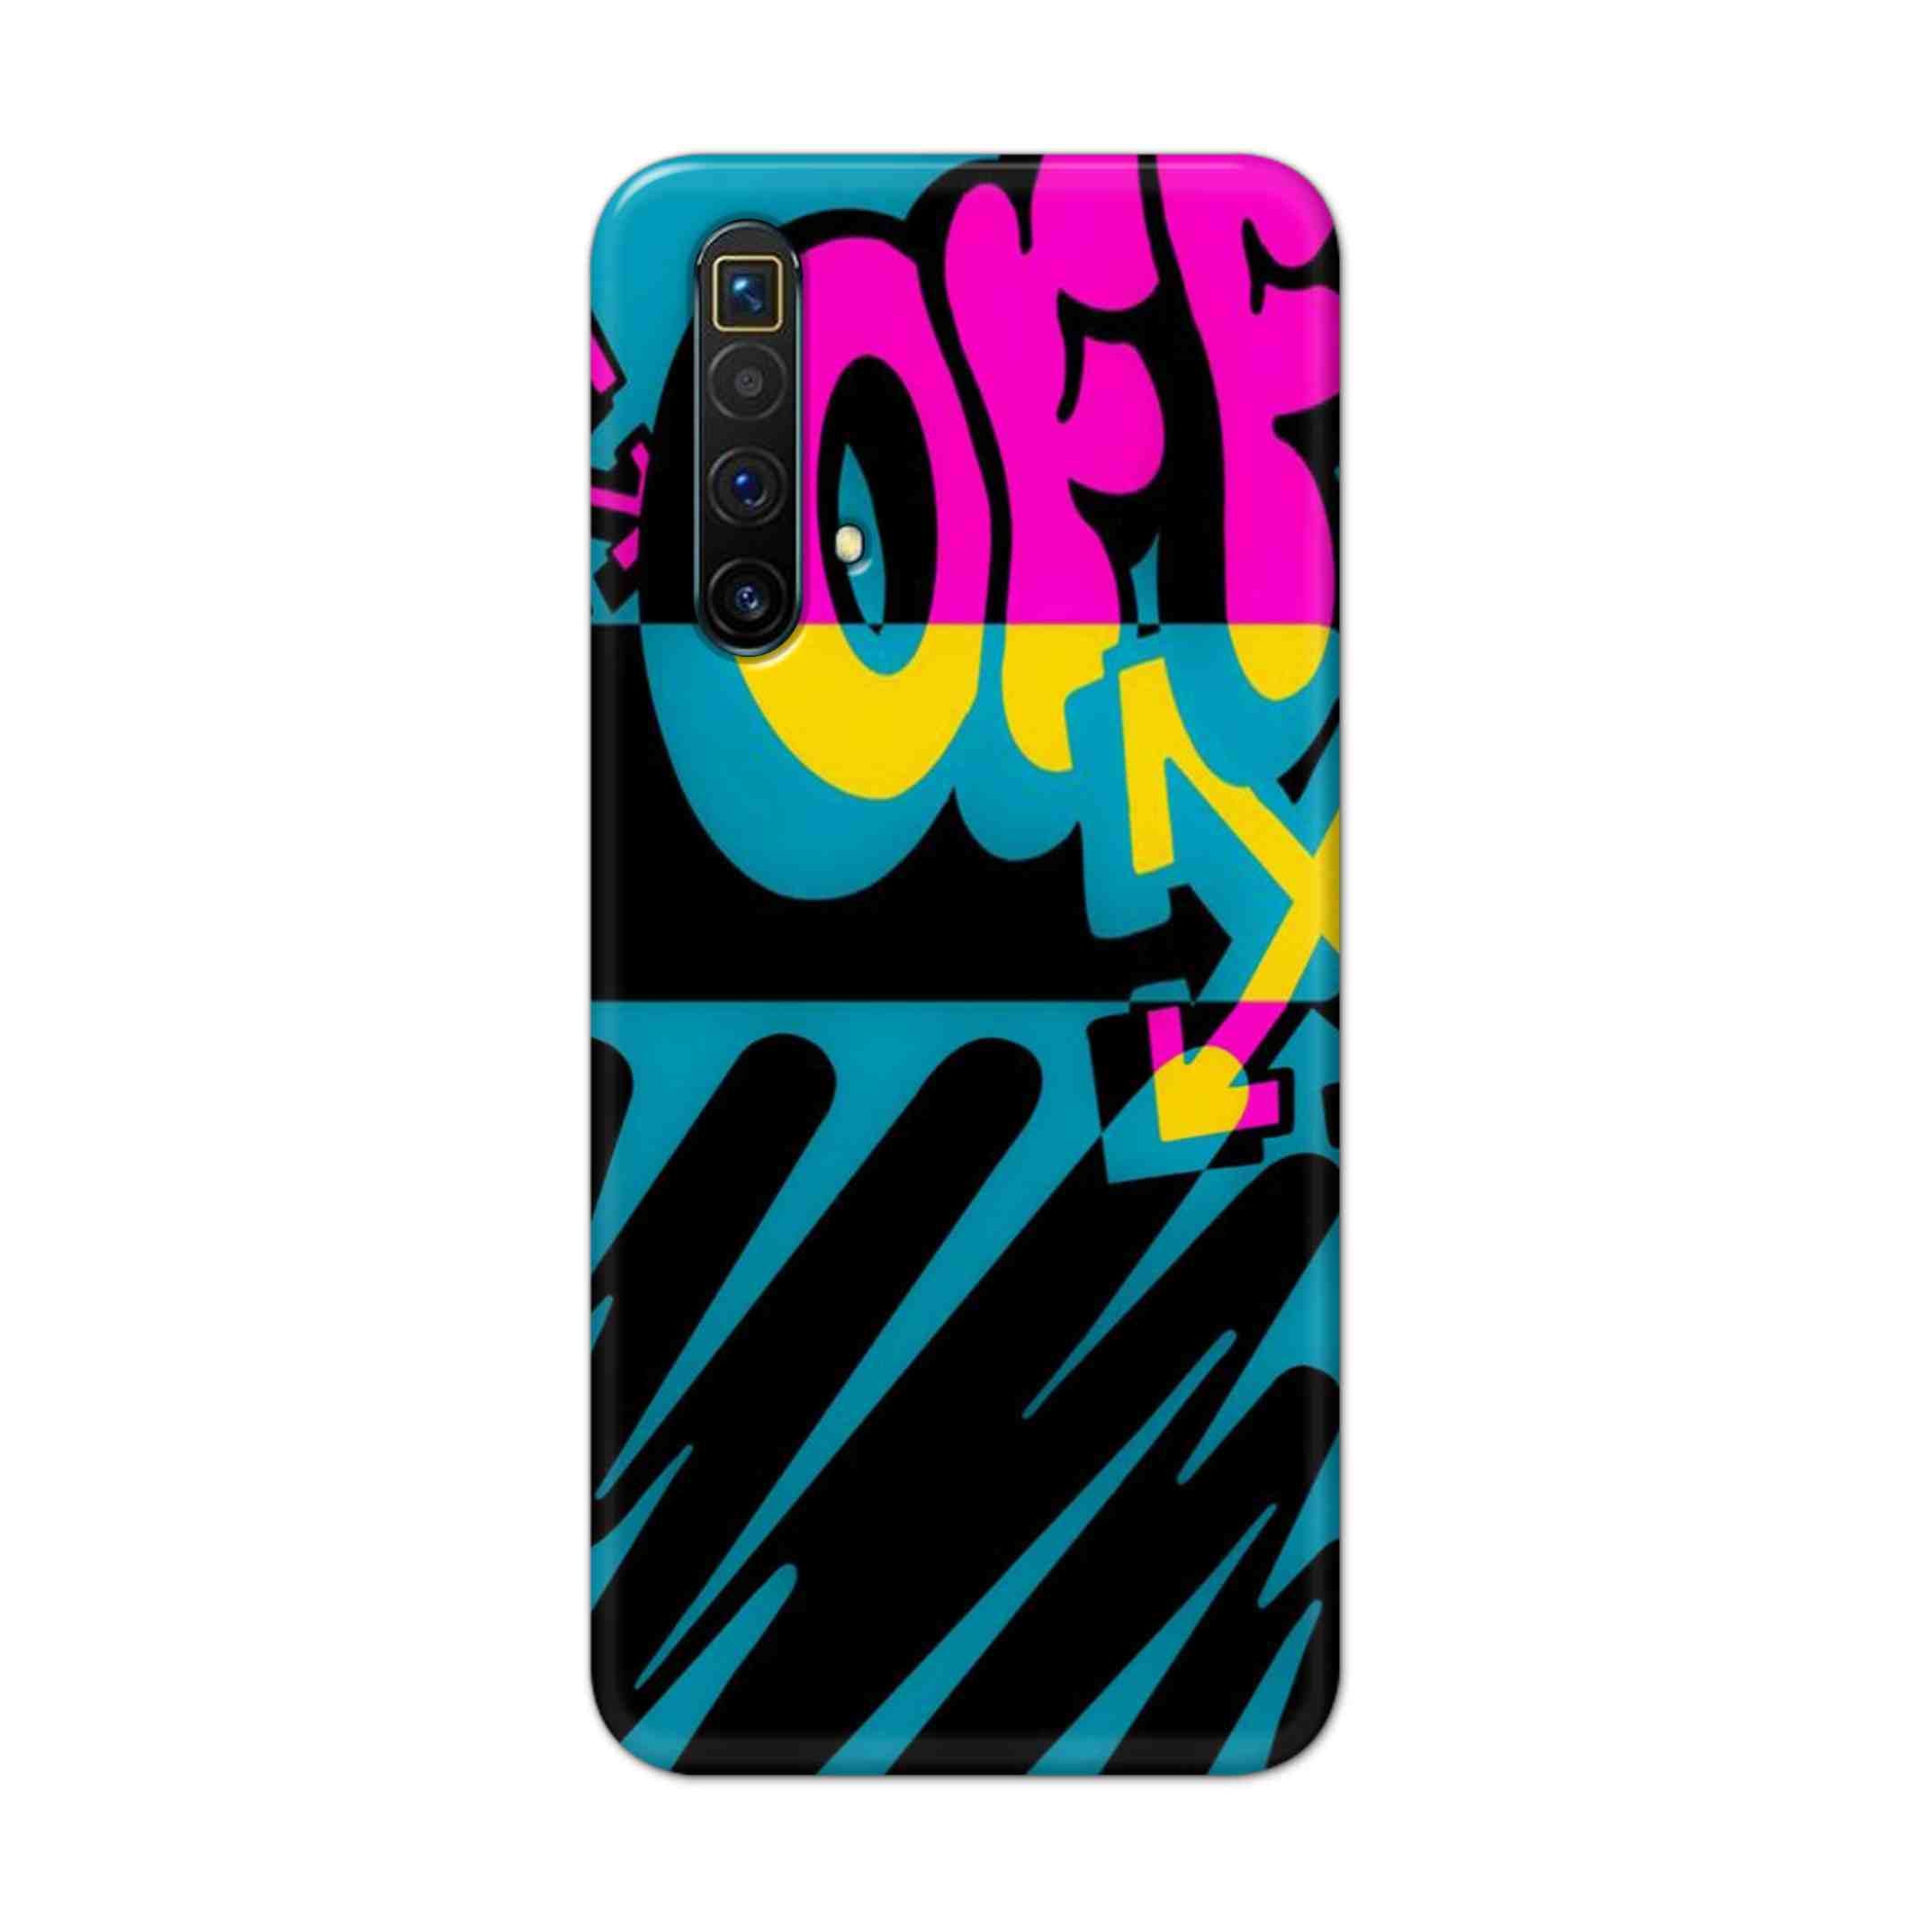 Buy Off Hard Back Mobile Phone Case Cover For Oppo Realme X3 Online